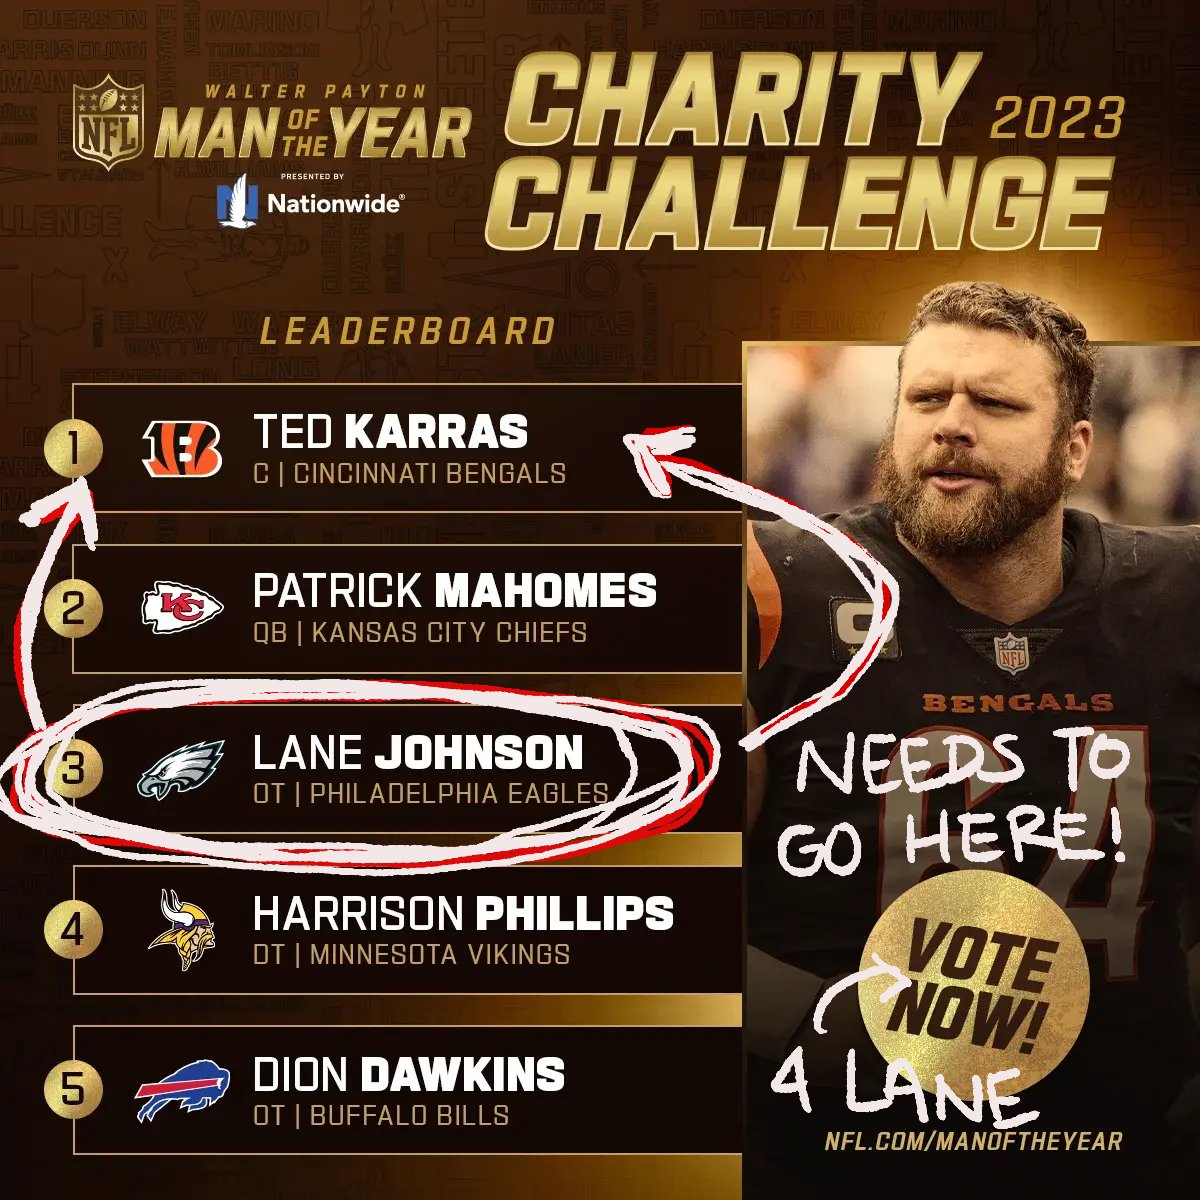 .@LaneJohnson65's in 3rd... You know what to do... Keep RTing‼️ #WPMOYChallenge